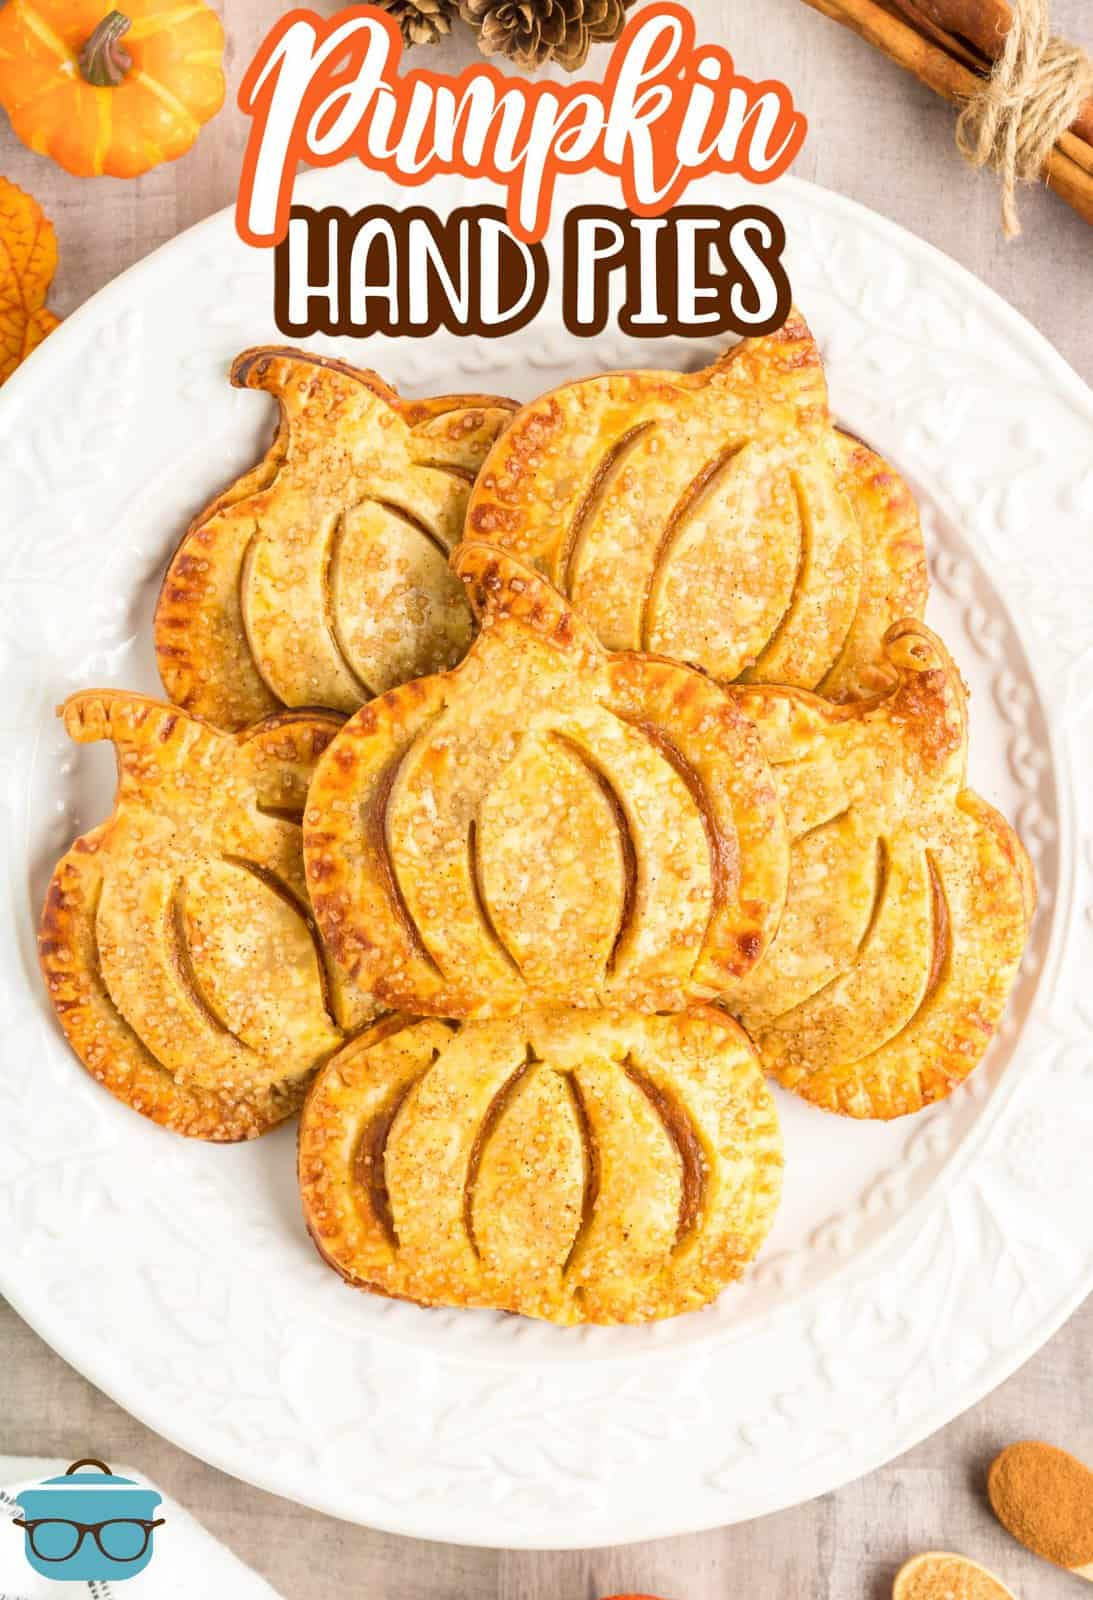 Pinterest image overhead of Pumpkin Hand Pies stacked on white plate.